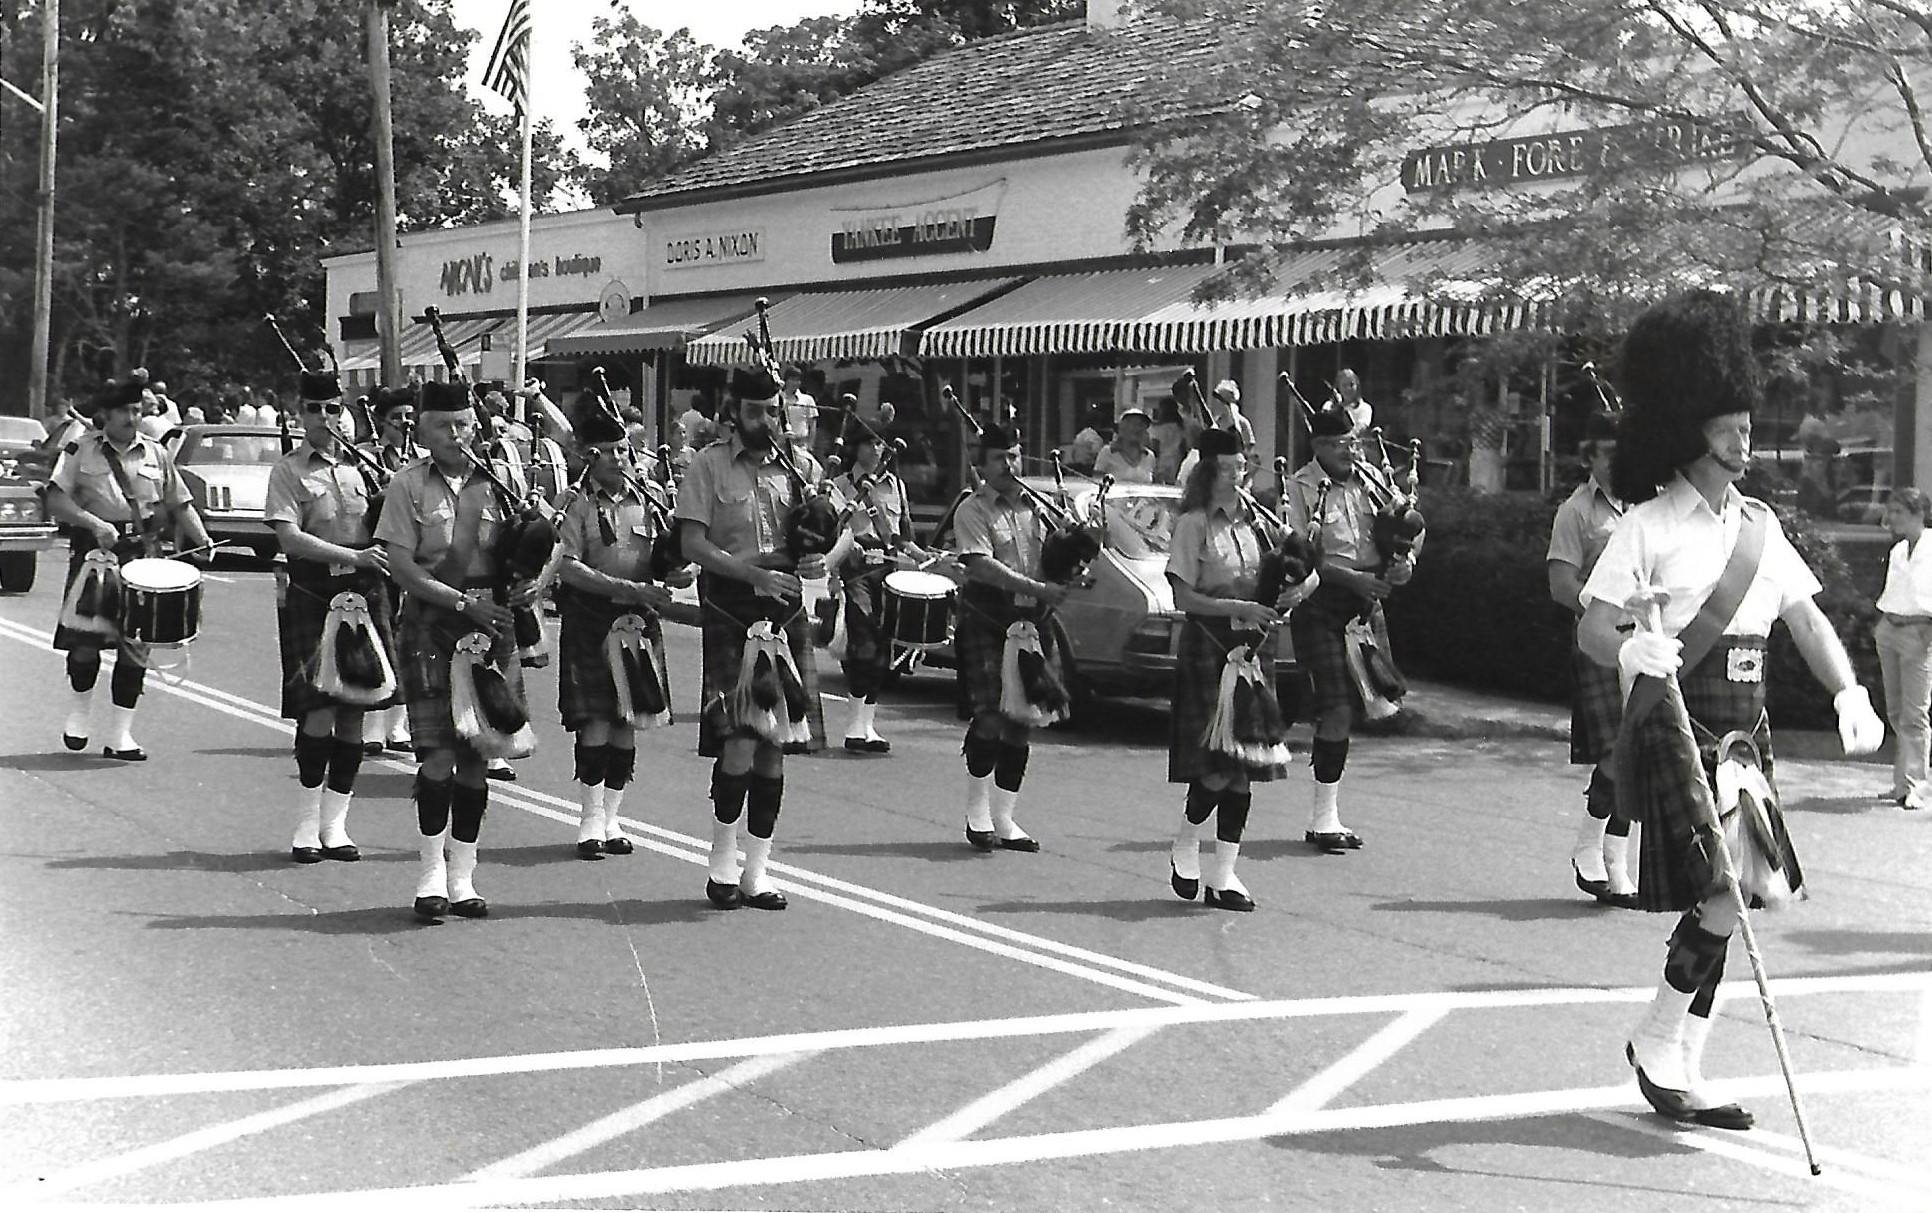 The Highland Light band from long ago